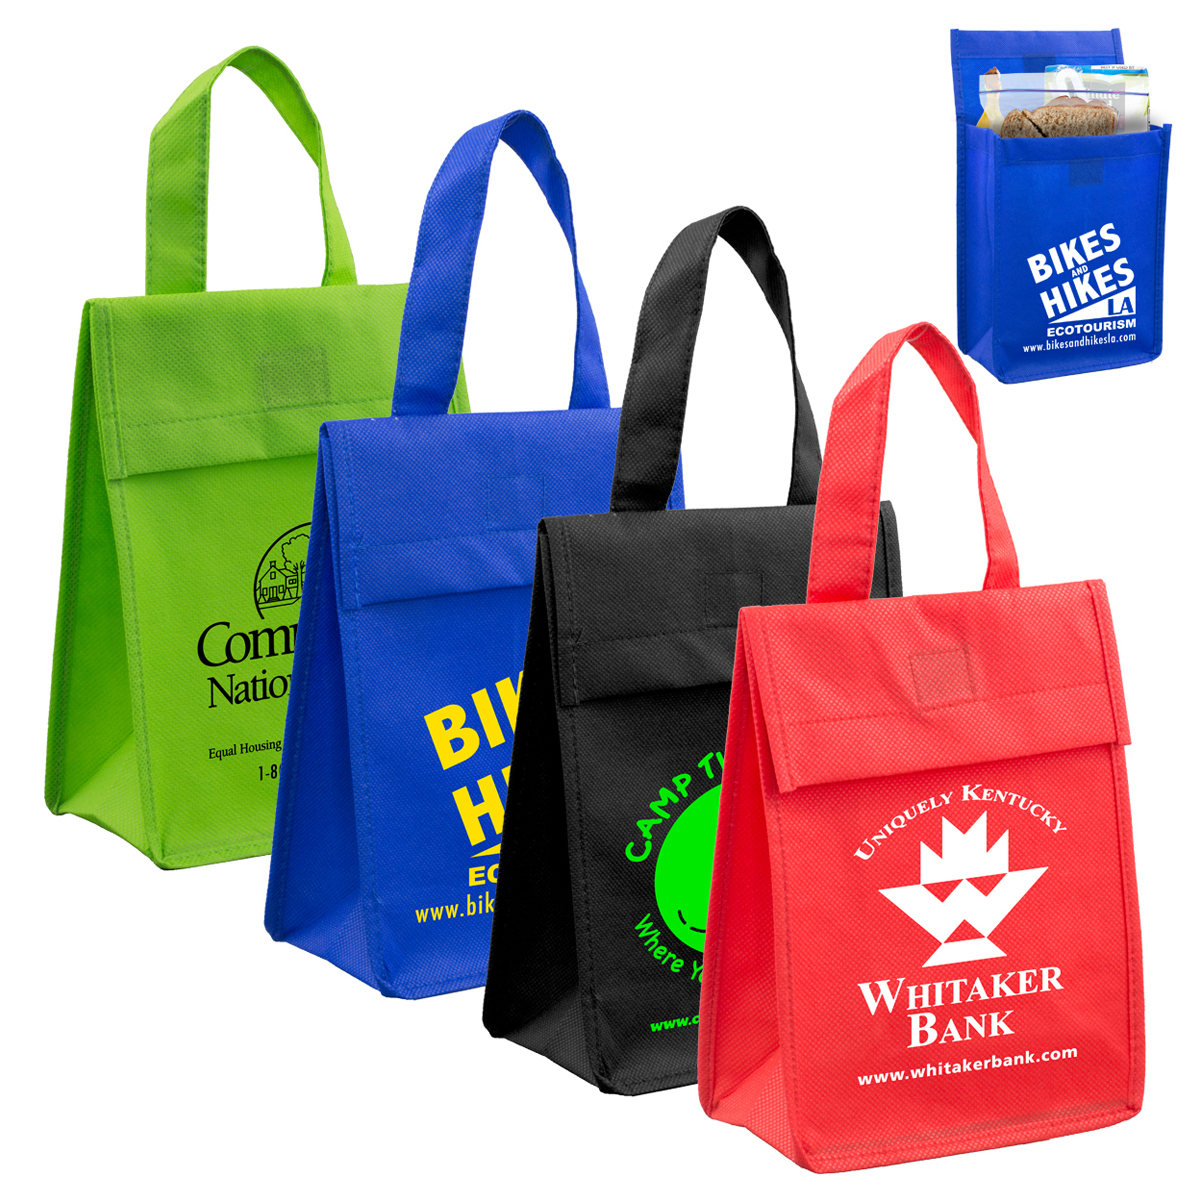 80GSM Non-Woven 'Bag-it' Value Priced Lightweight Lunch Tote